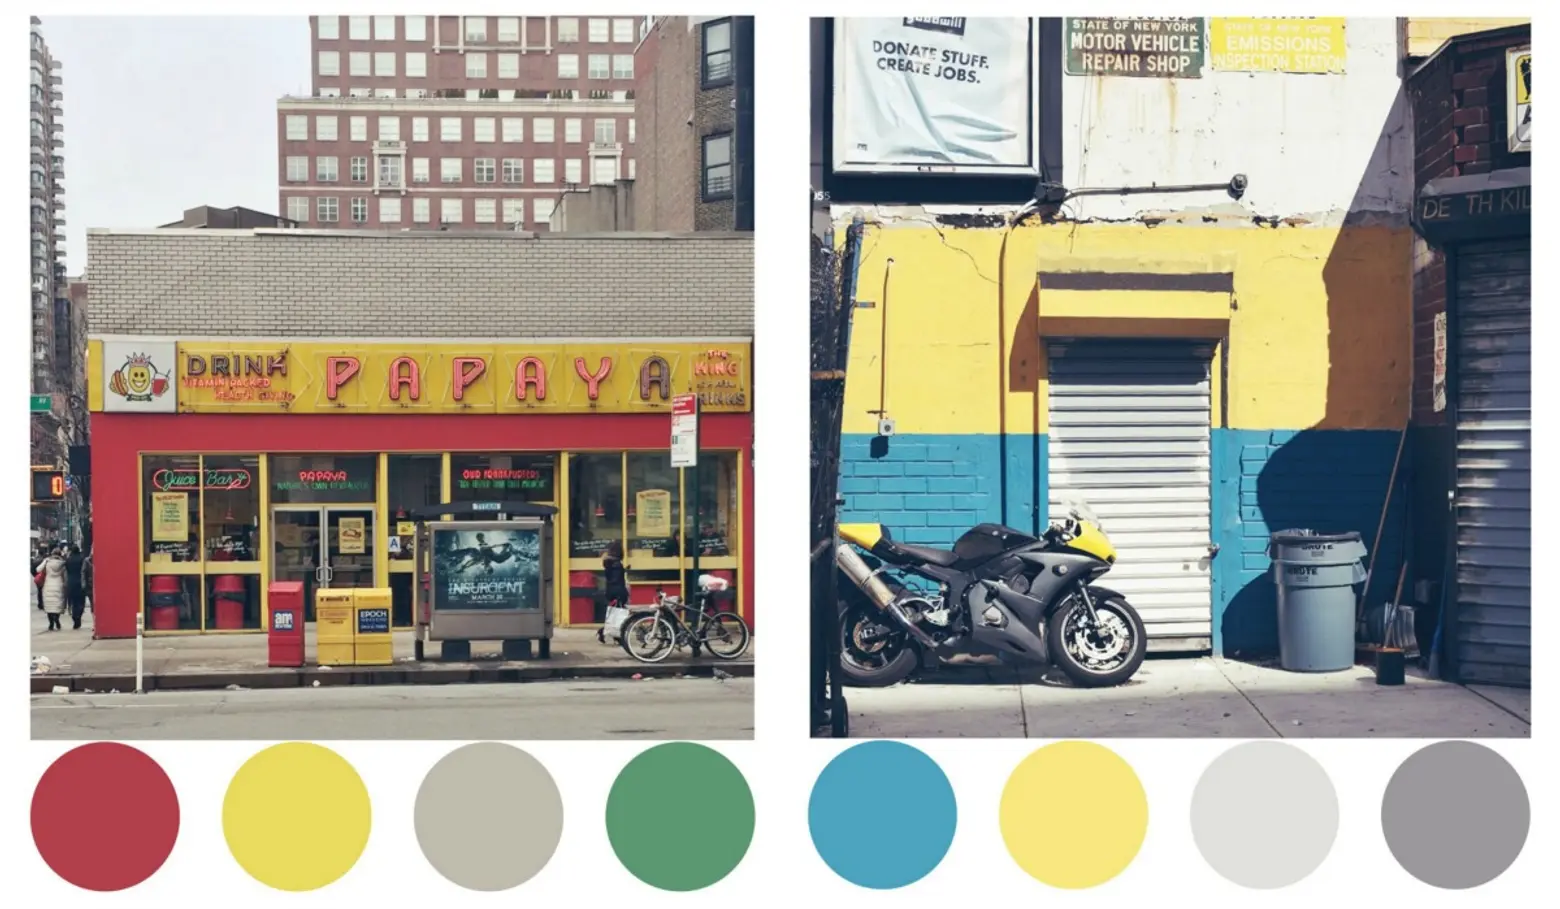 Color Me NYC, Andrew Bly, NYC photography, design color palettes